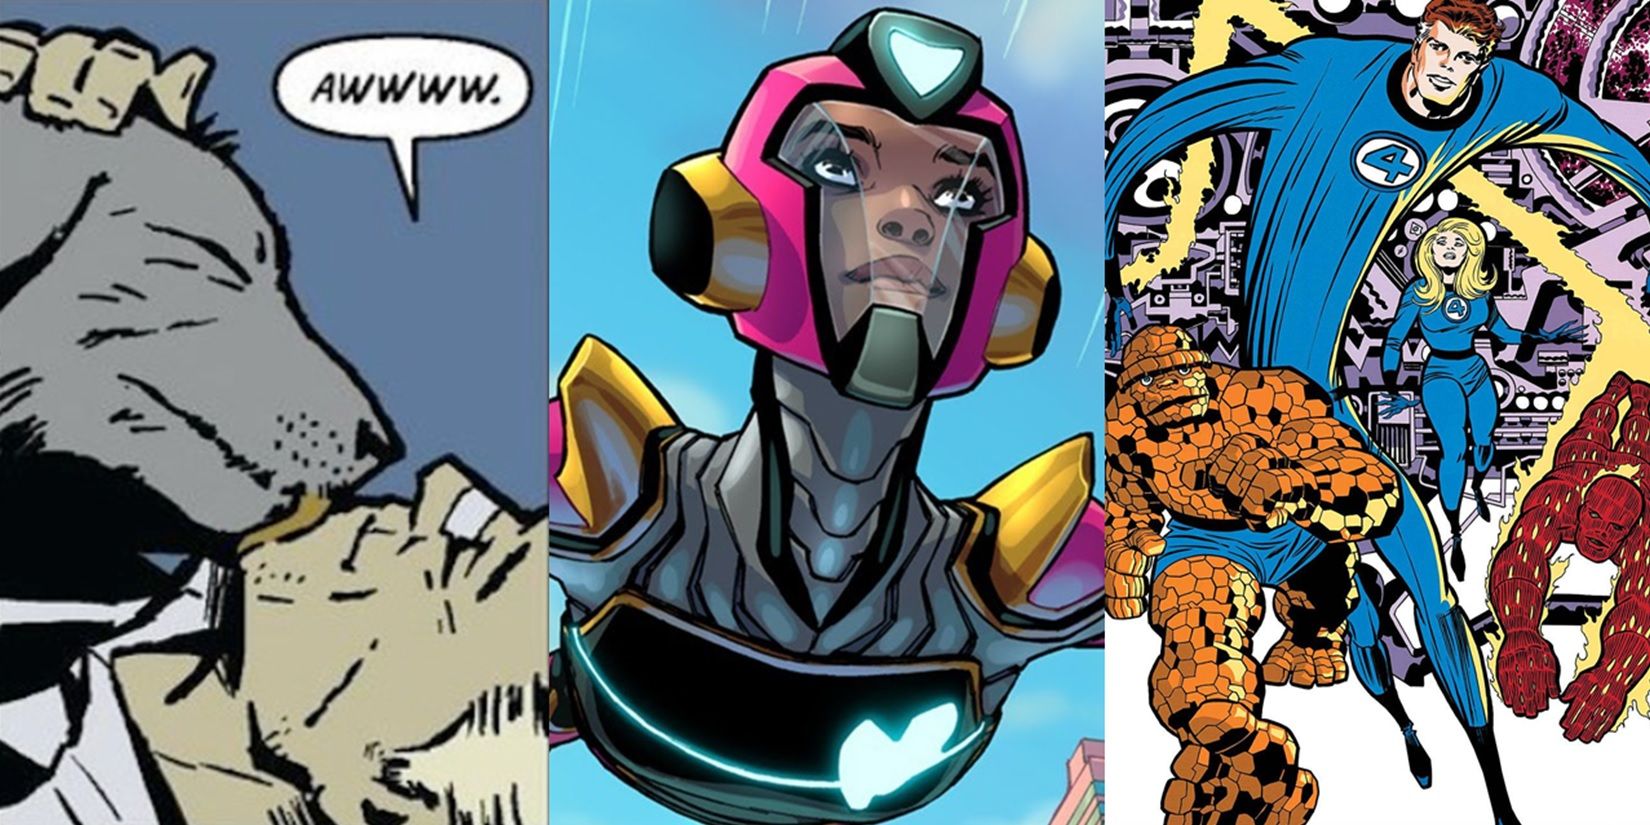 Lucky the Pizza Dog, Ironheart, and the Fantastic Four